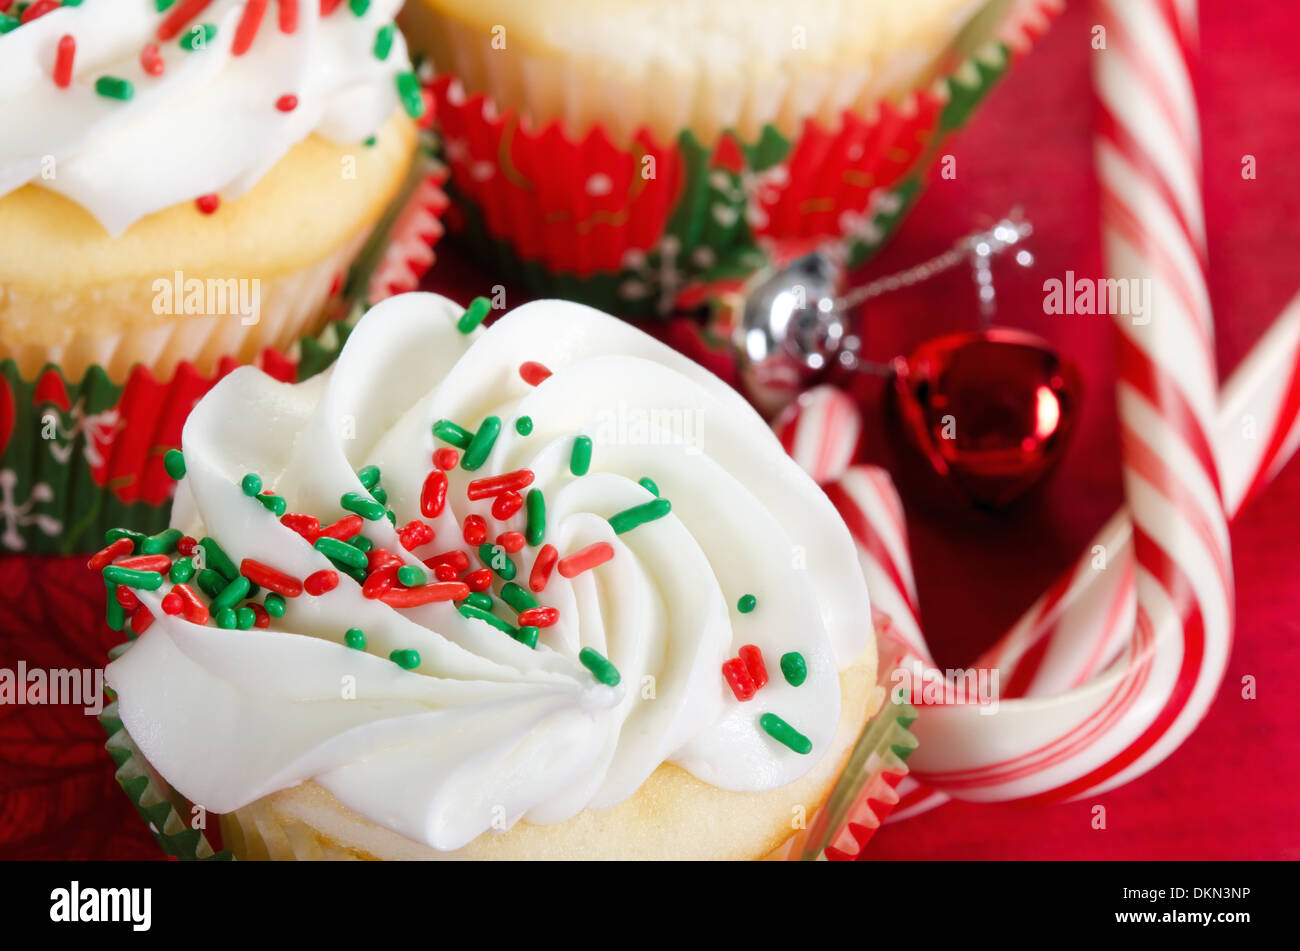 Holiday cupcakes with vanilla frosting and red and green sprinkles. Red holiday background with candy canes and bells. Stock Photo